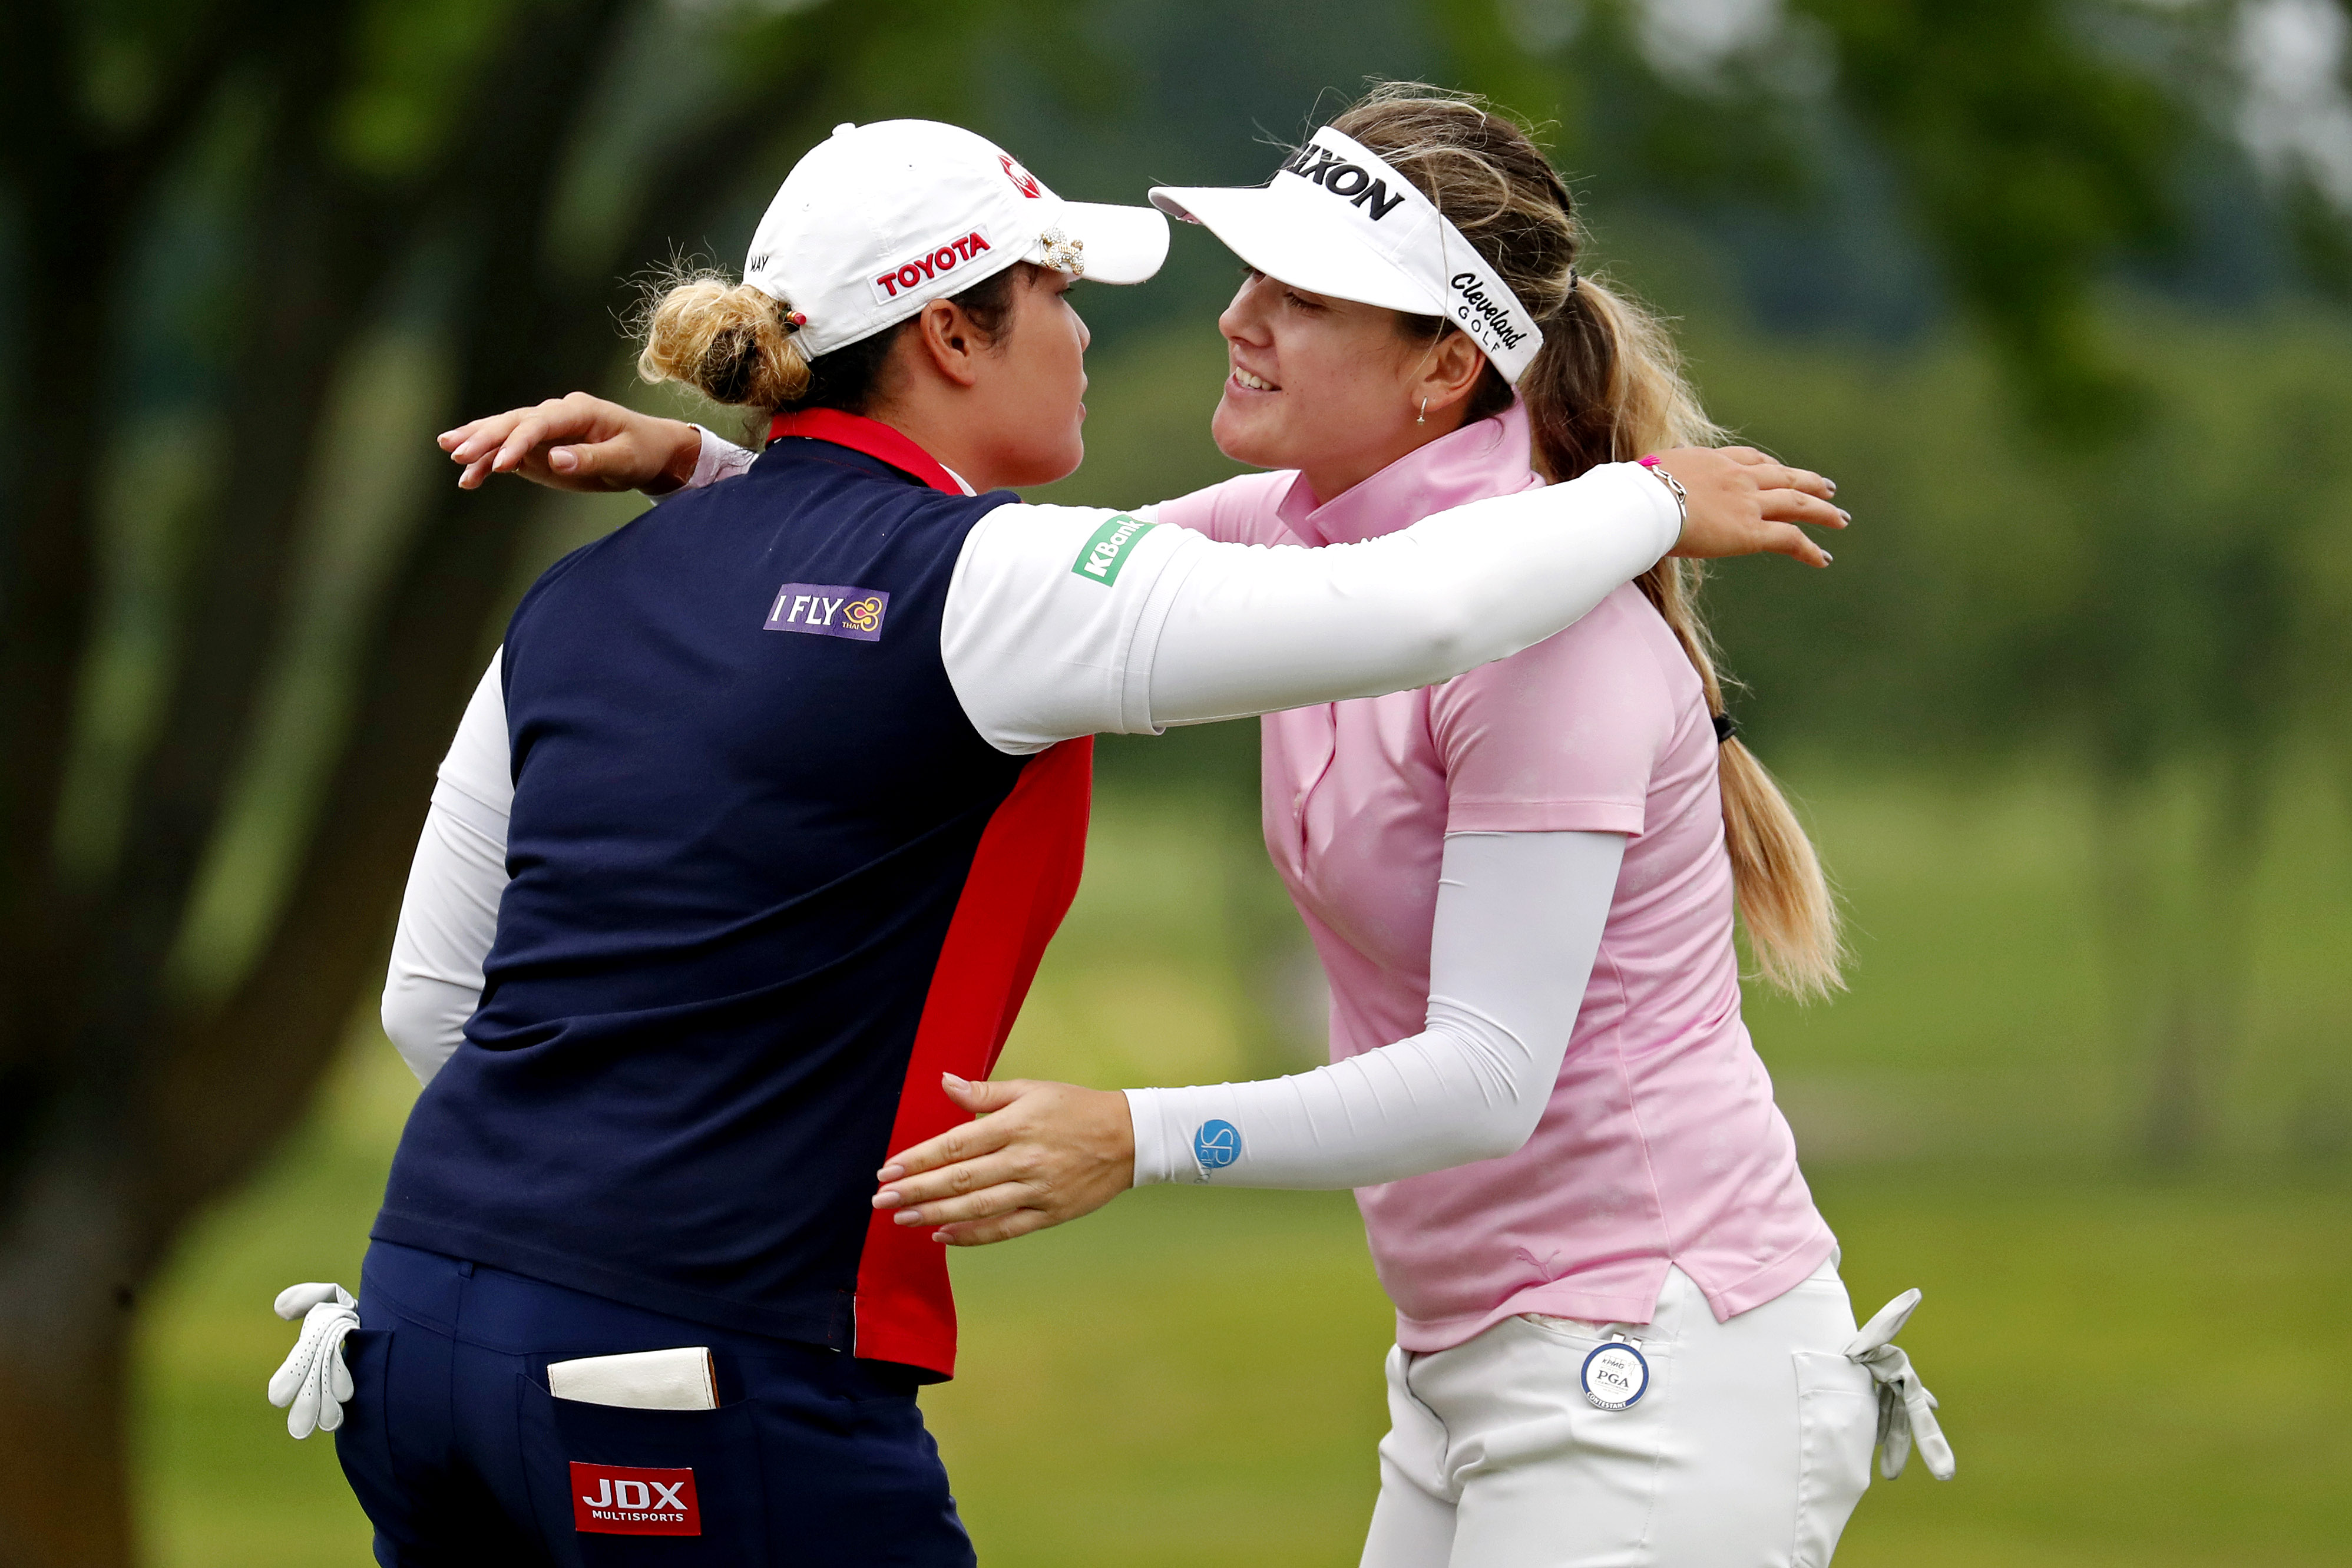 9 things to know after the third round of the KPMG Women's PGA Championship